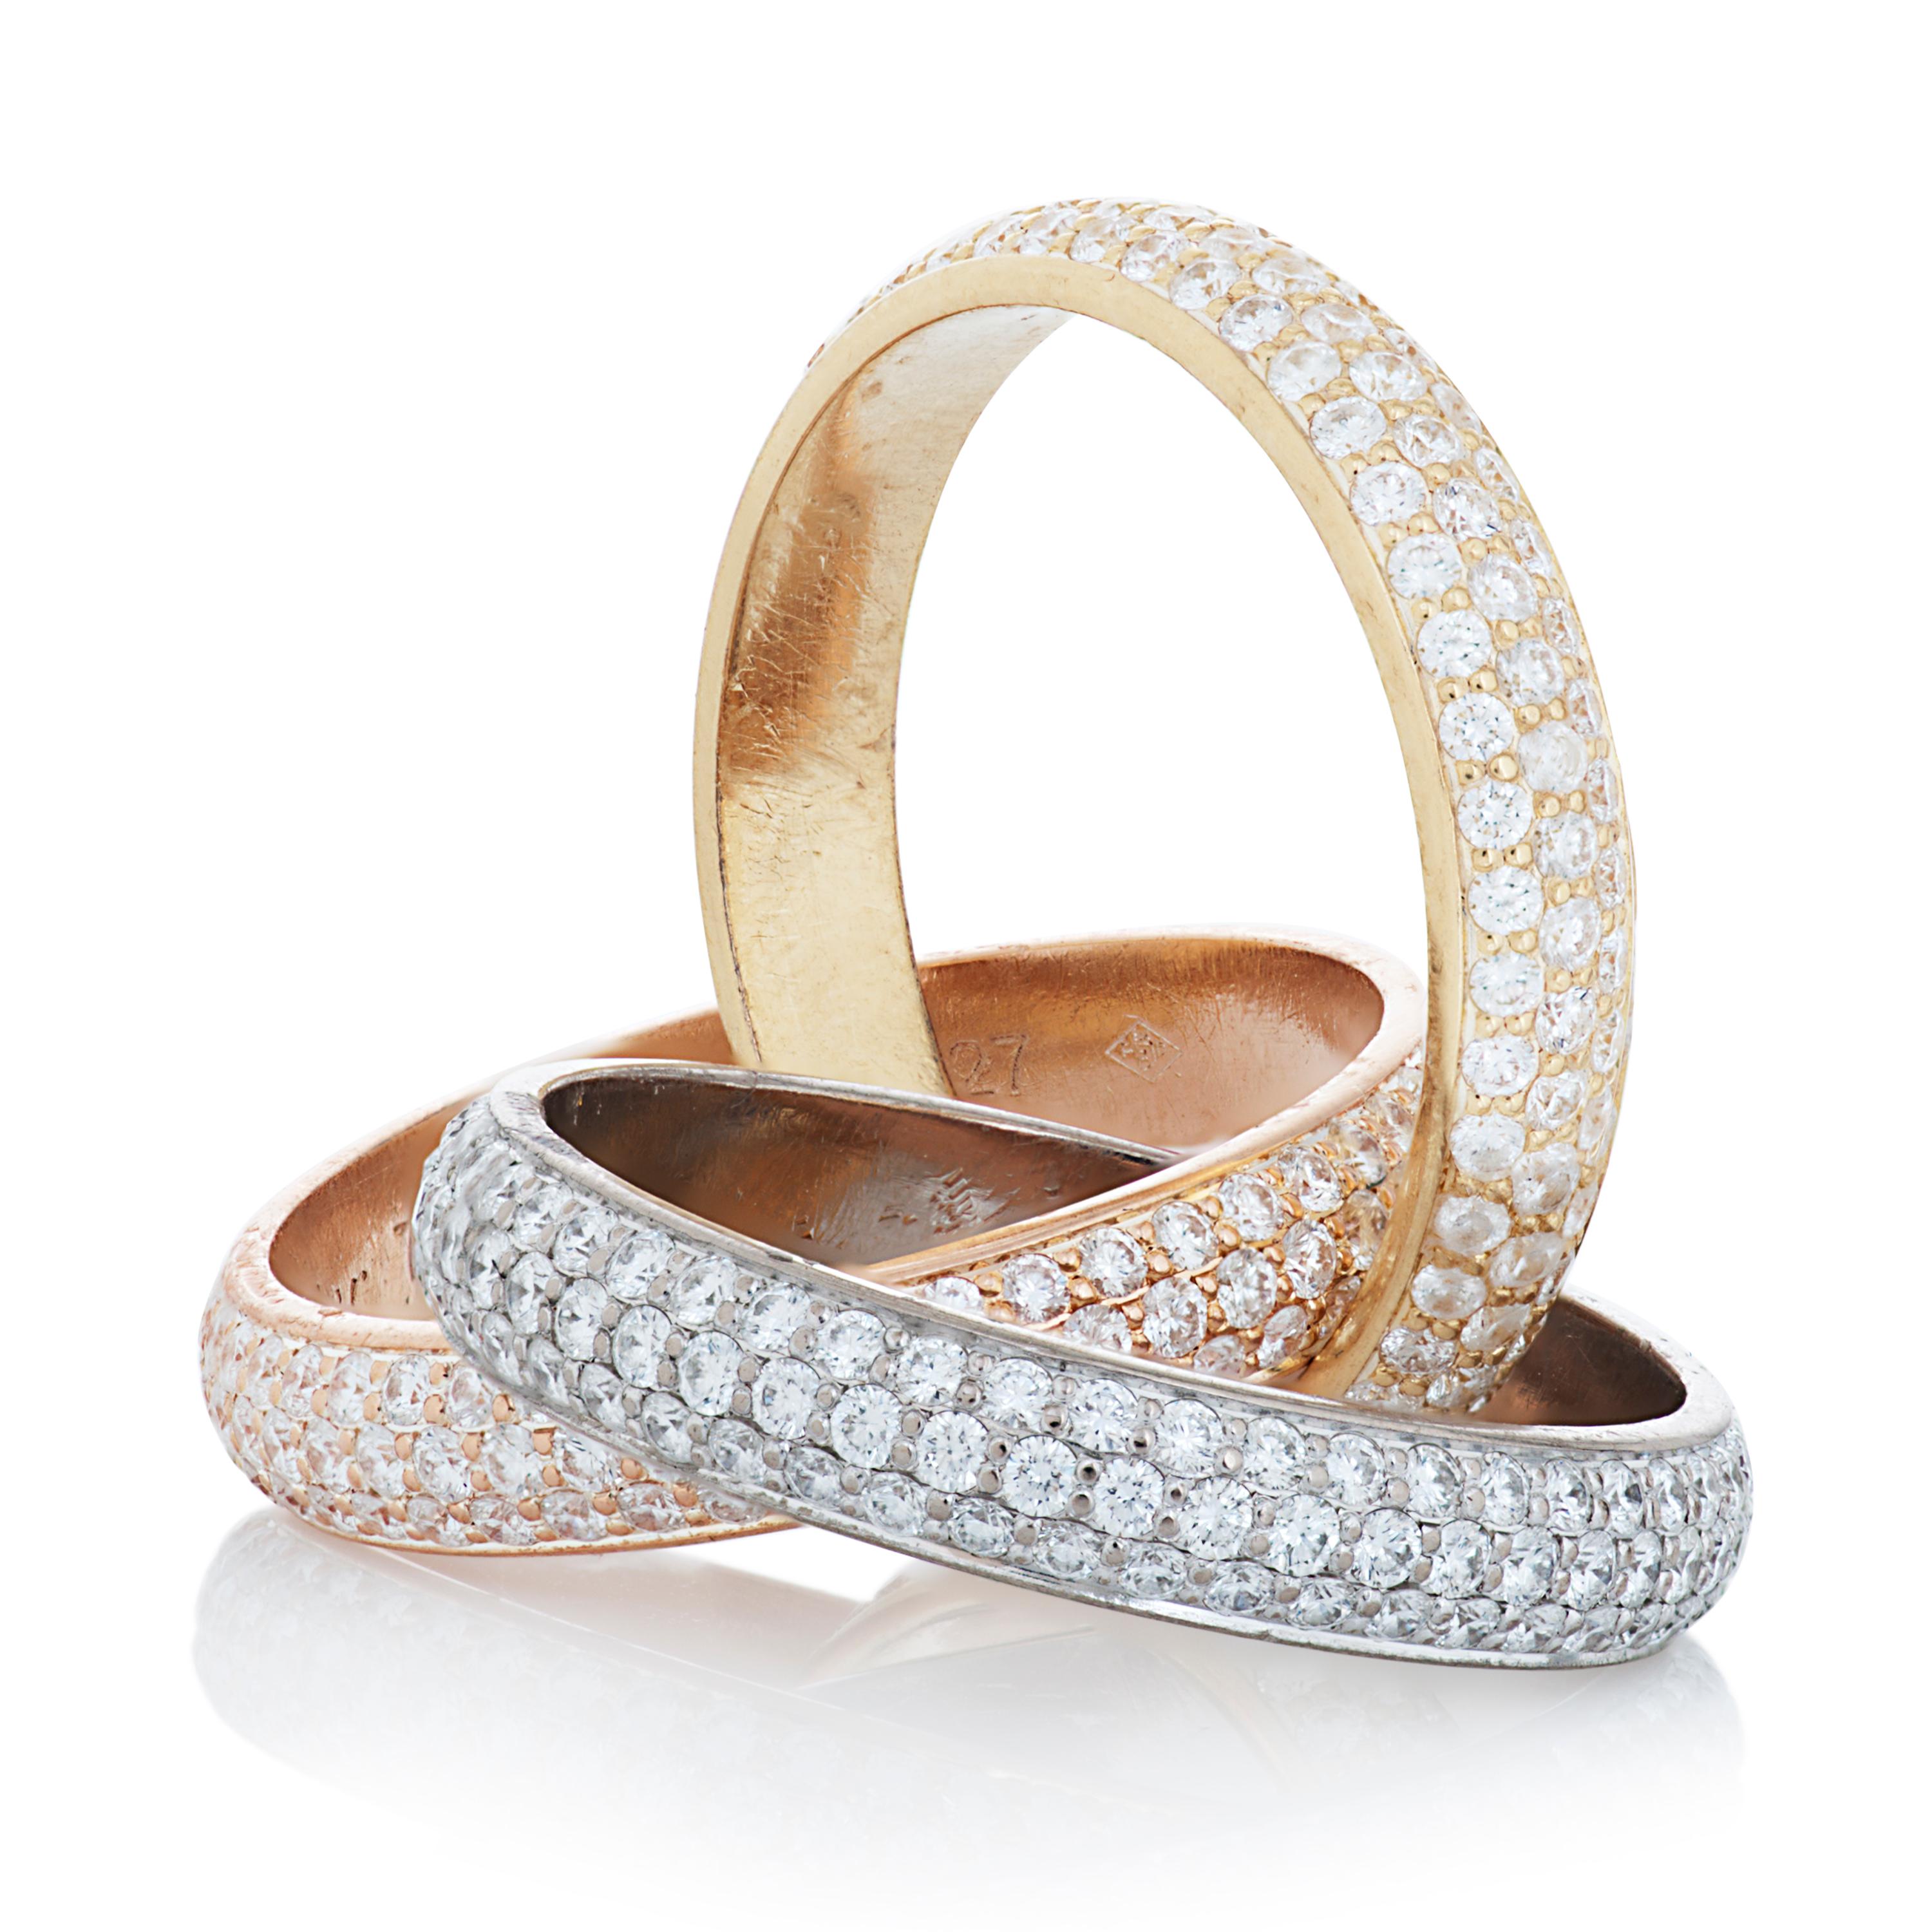 Round Cut Cartier Classic Model Diamond Trinity Ring in 18k White, Yellow and Rose Gold